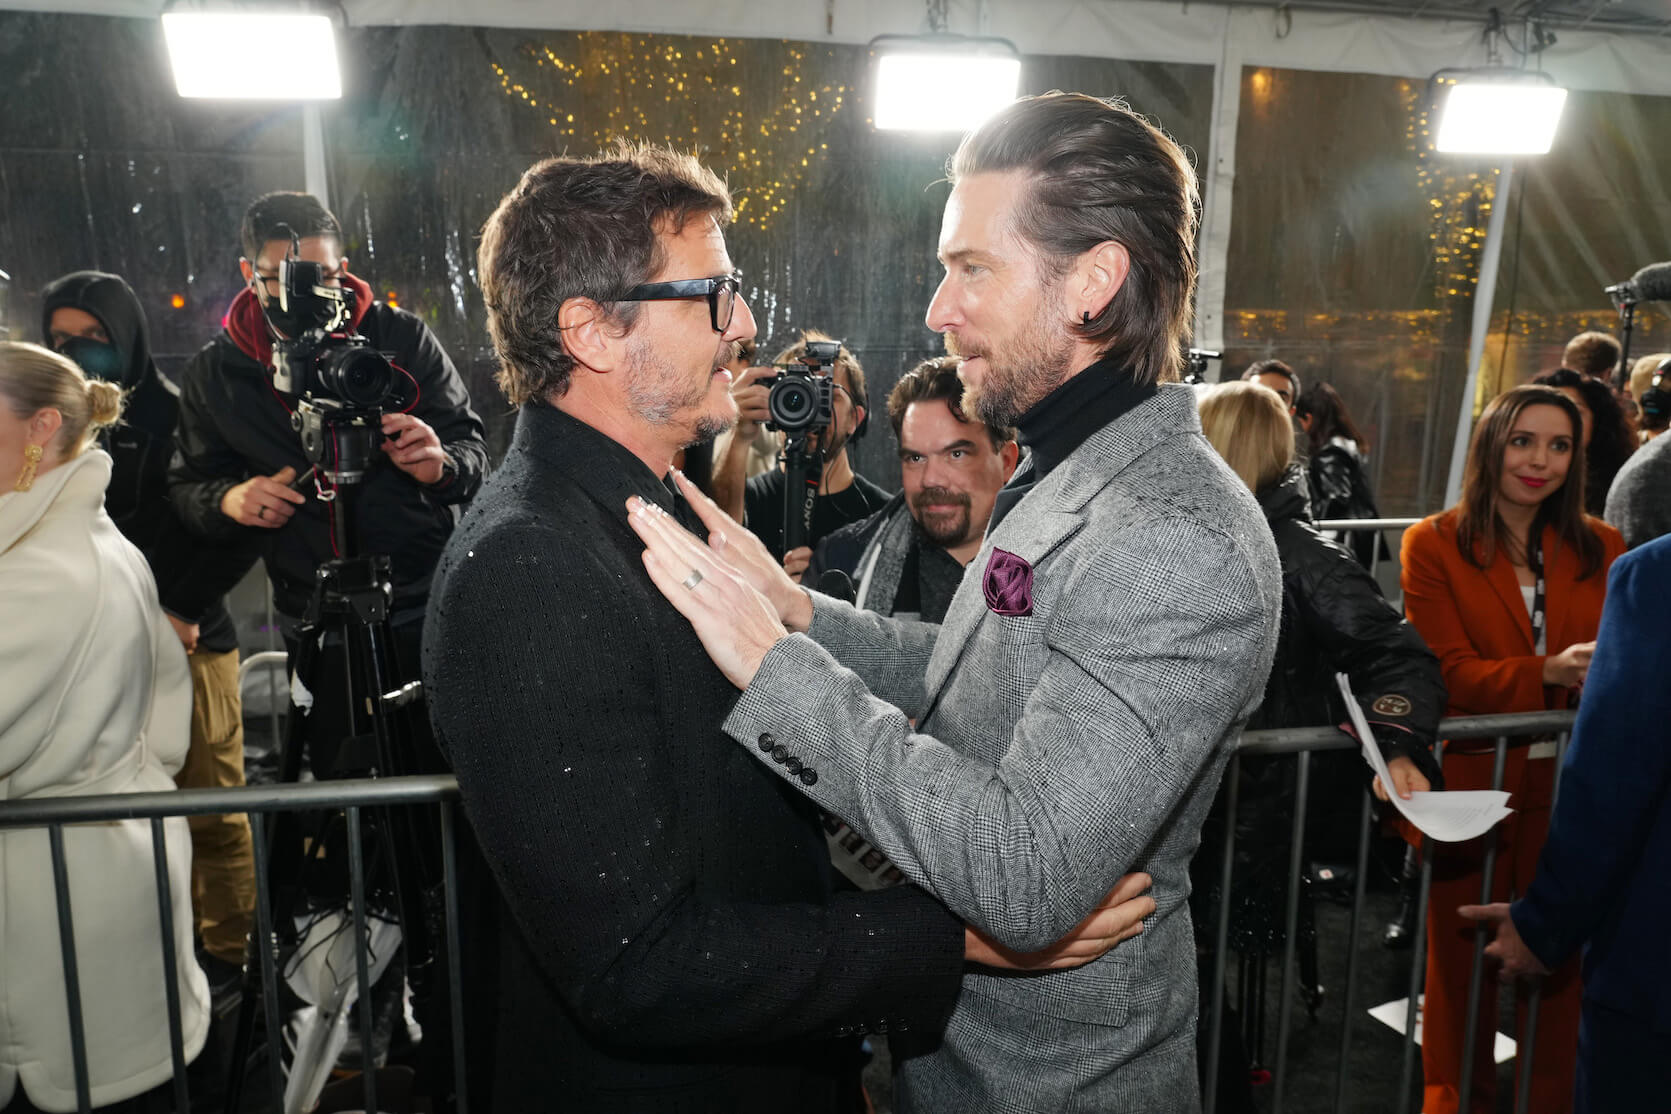 Pedro Pascal and voice actor Troy Baker from 'The Last of Us' embracing each other at a press event